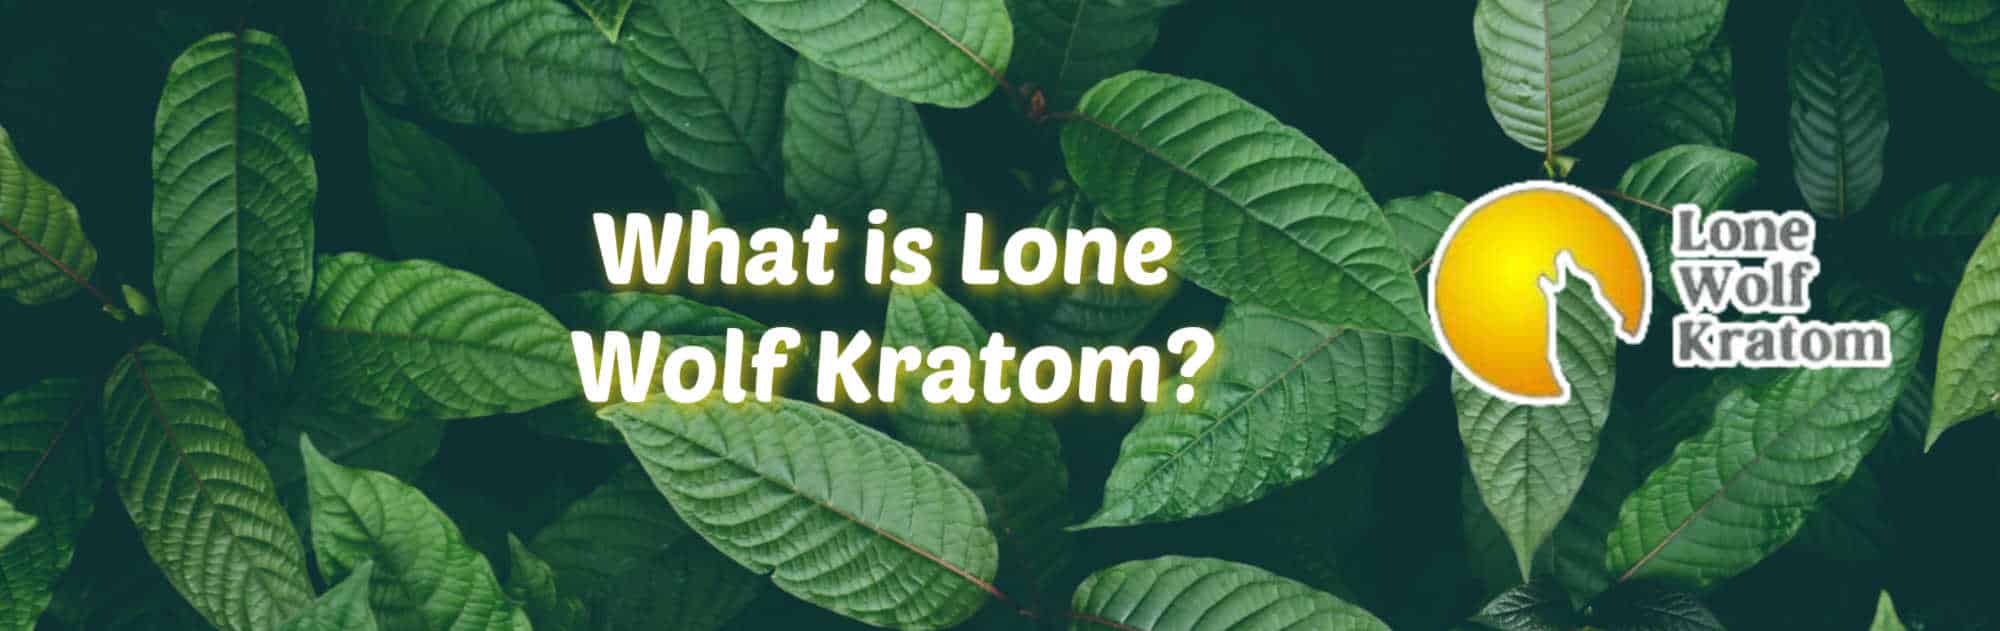 image of what is lone wolf kratom